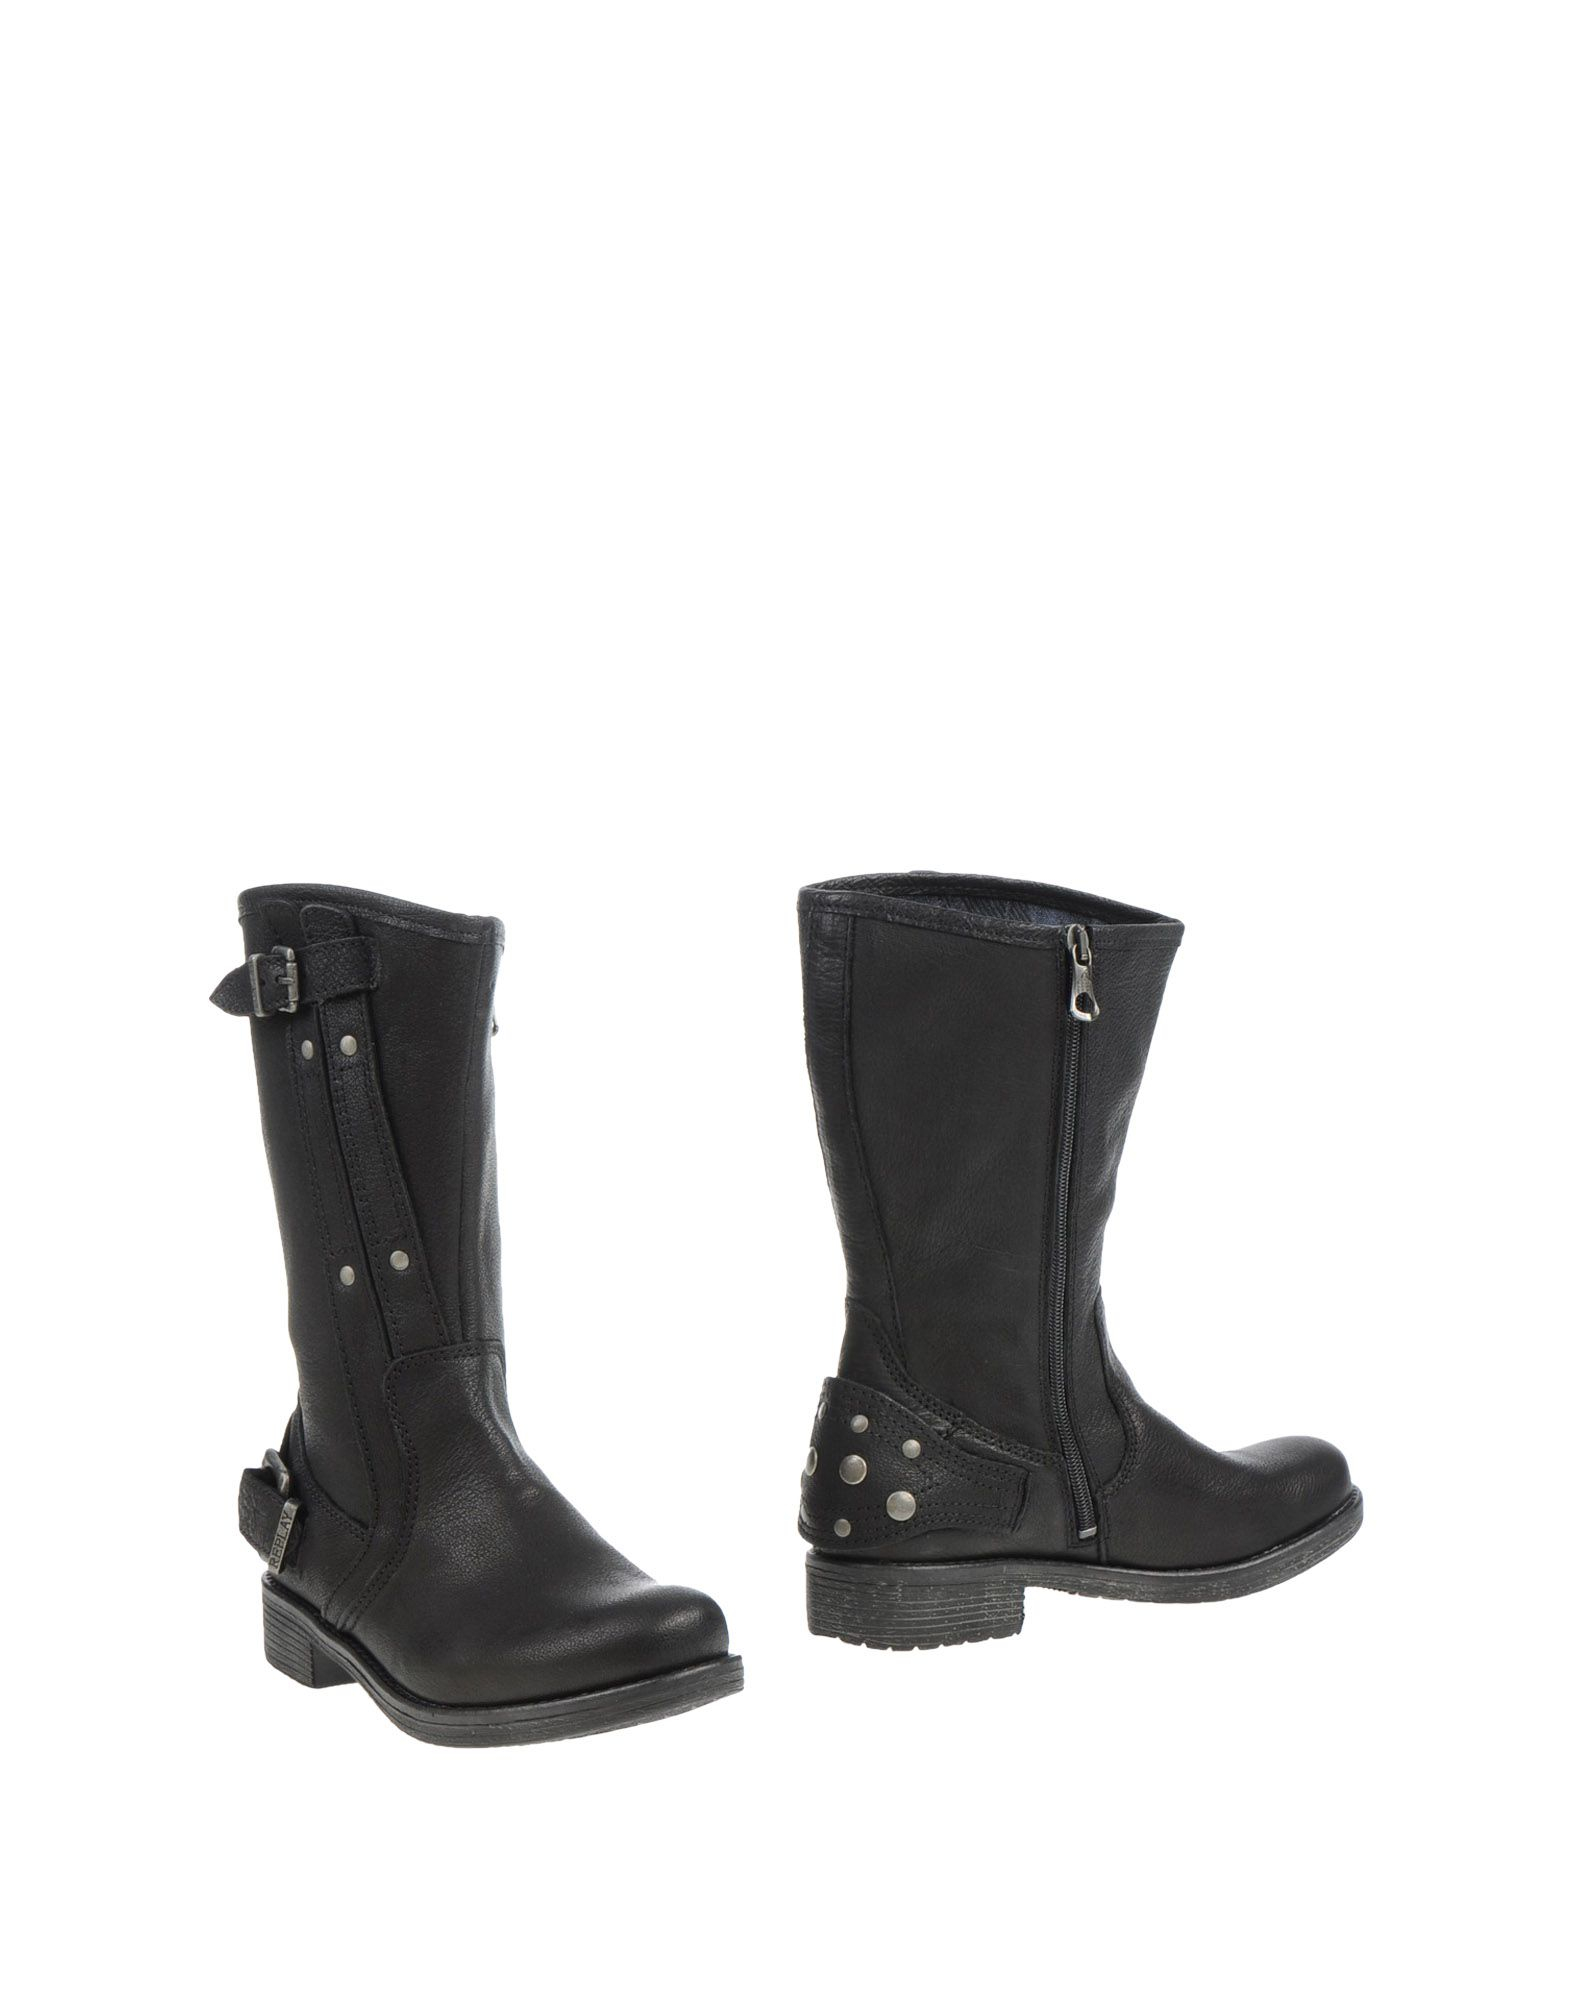 Lyst - Replay Ankle Boots in Black